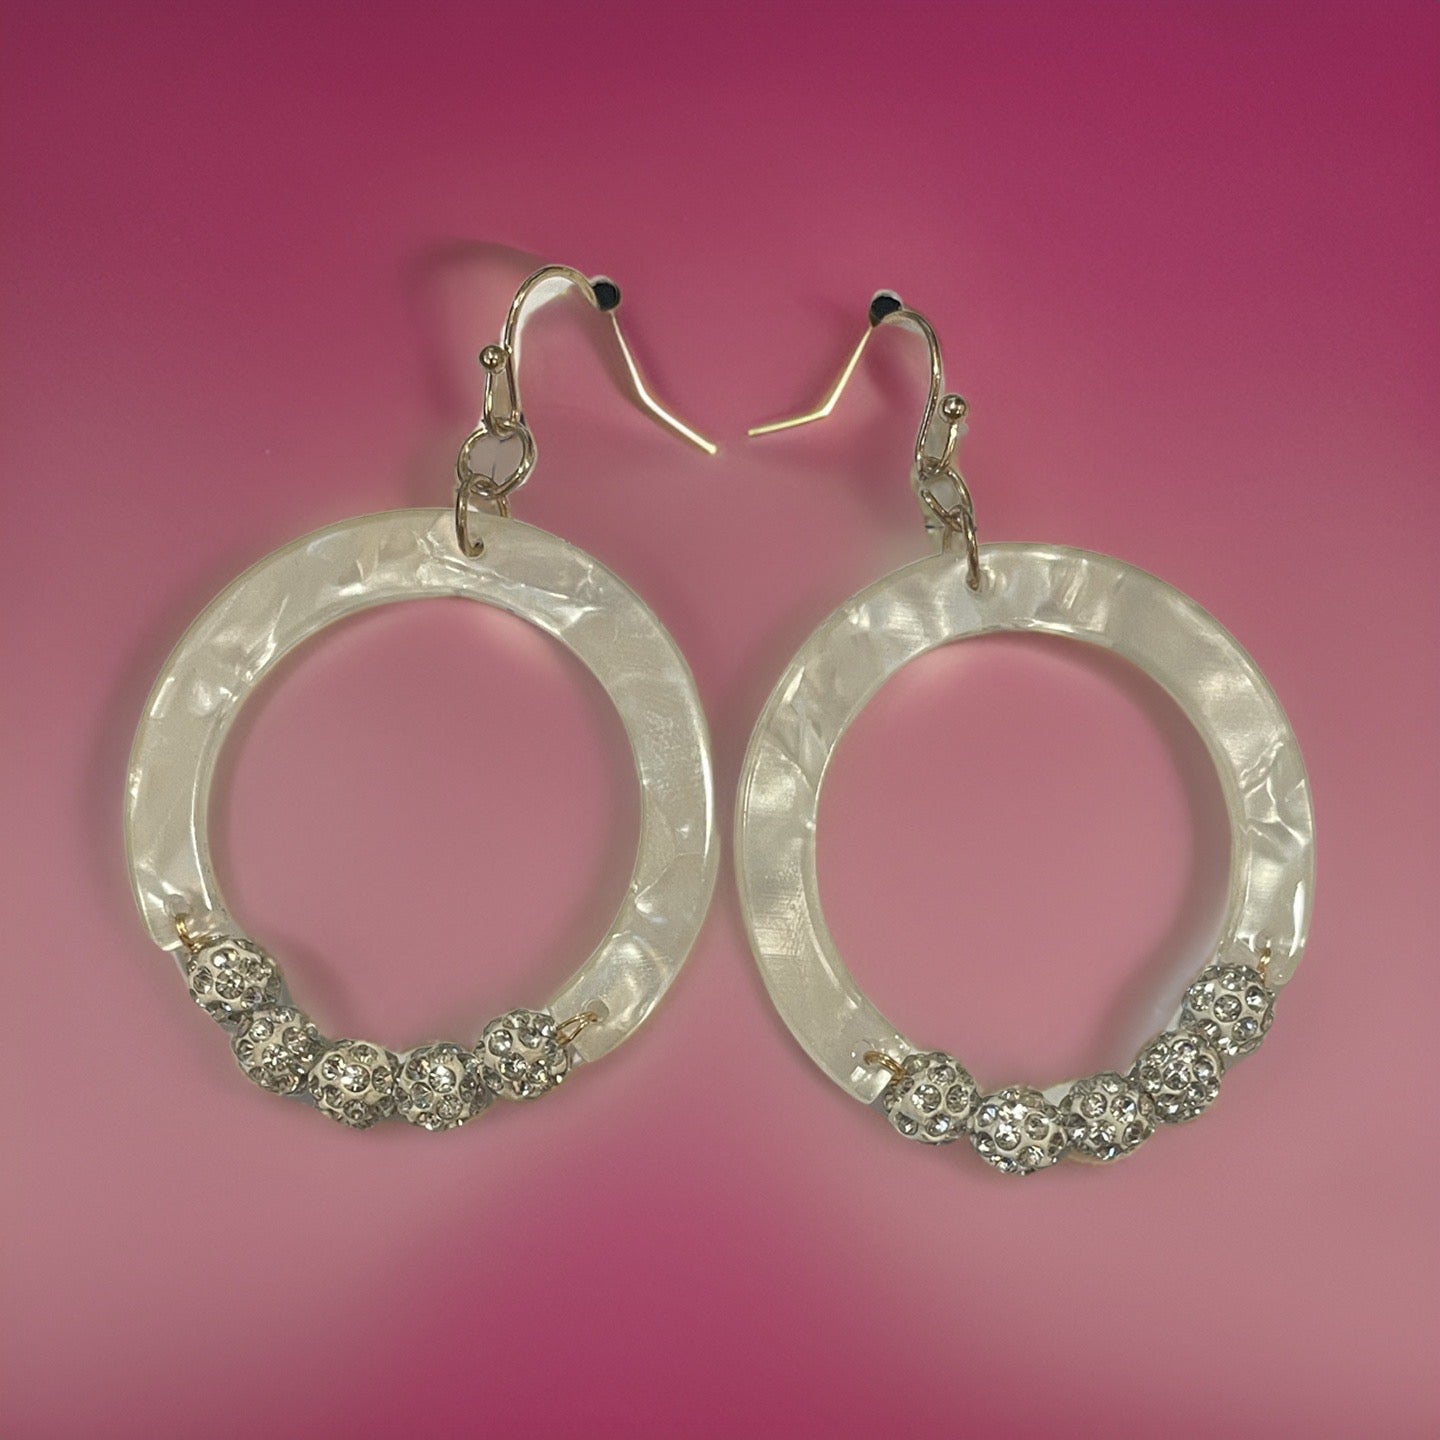 Marble resin open circle drop earrings with rhinestone studded beaded. Available in 4 colors